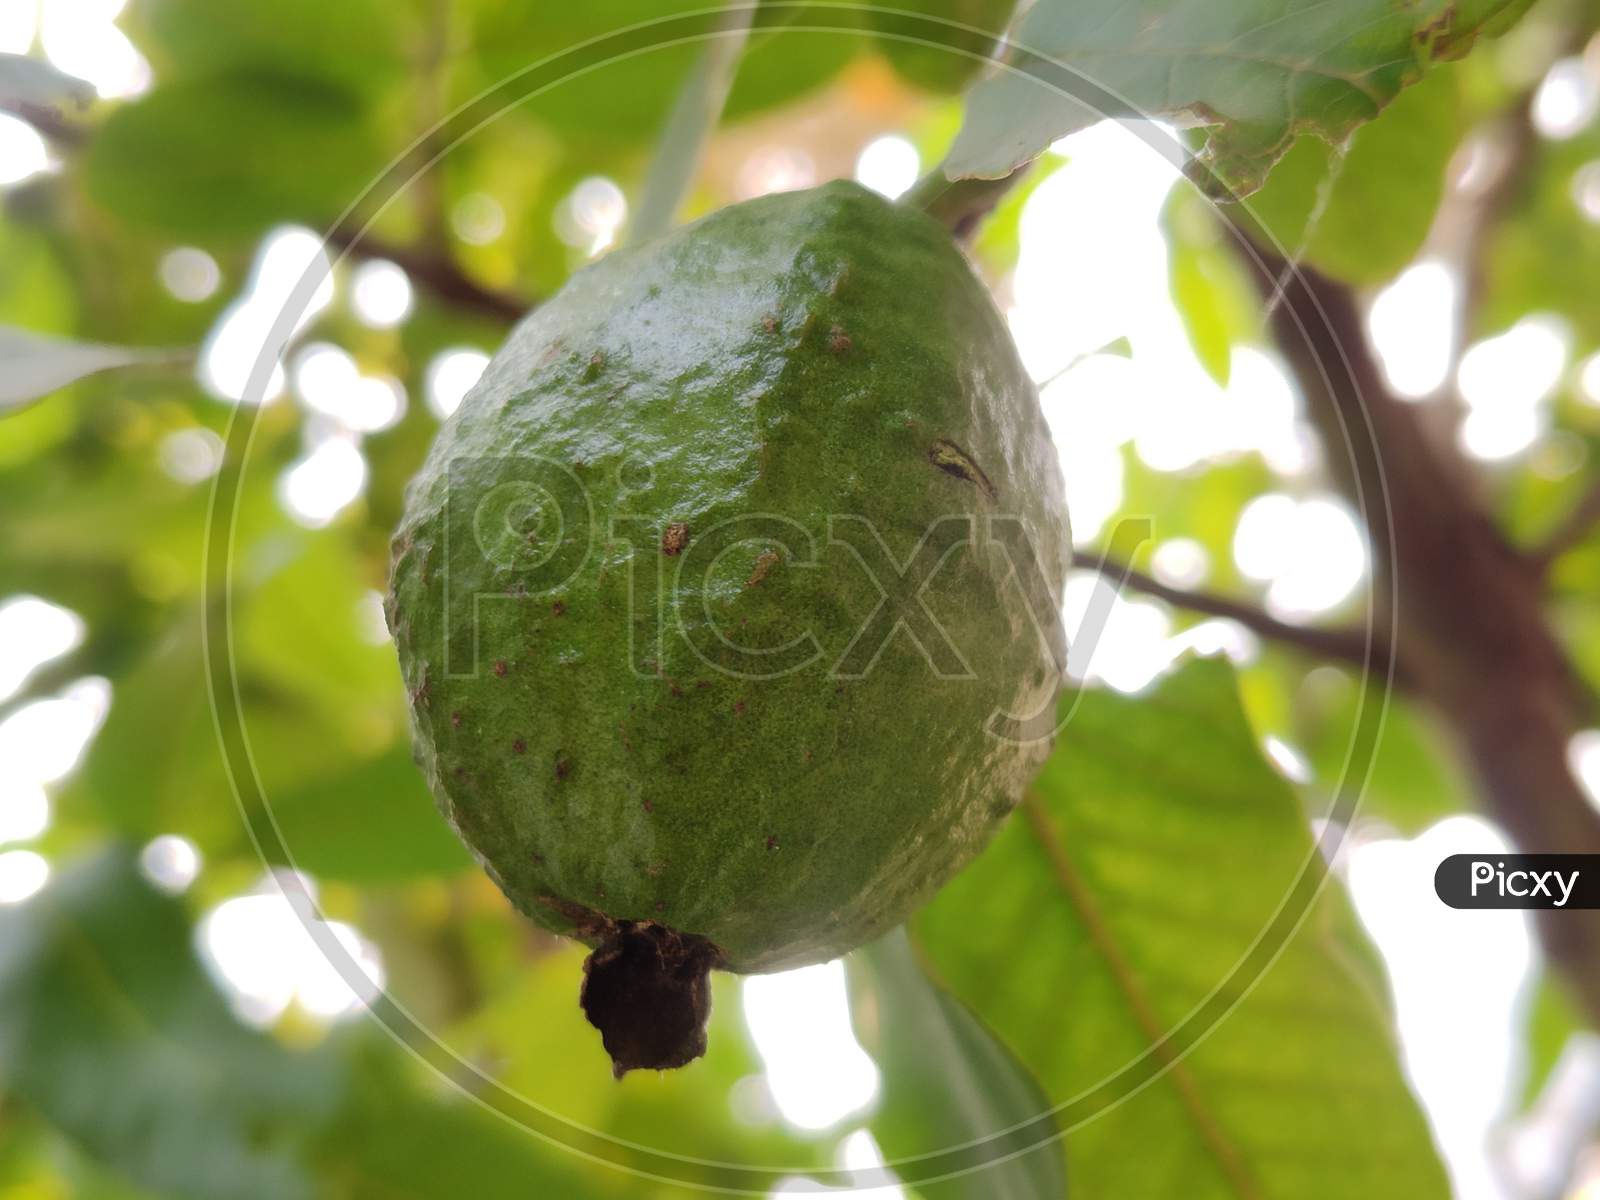 This photo is of a guava